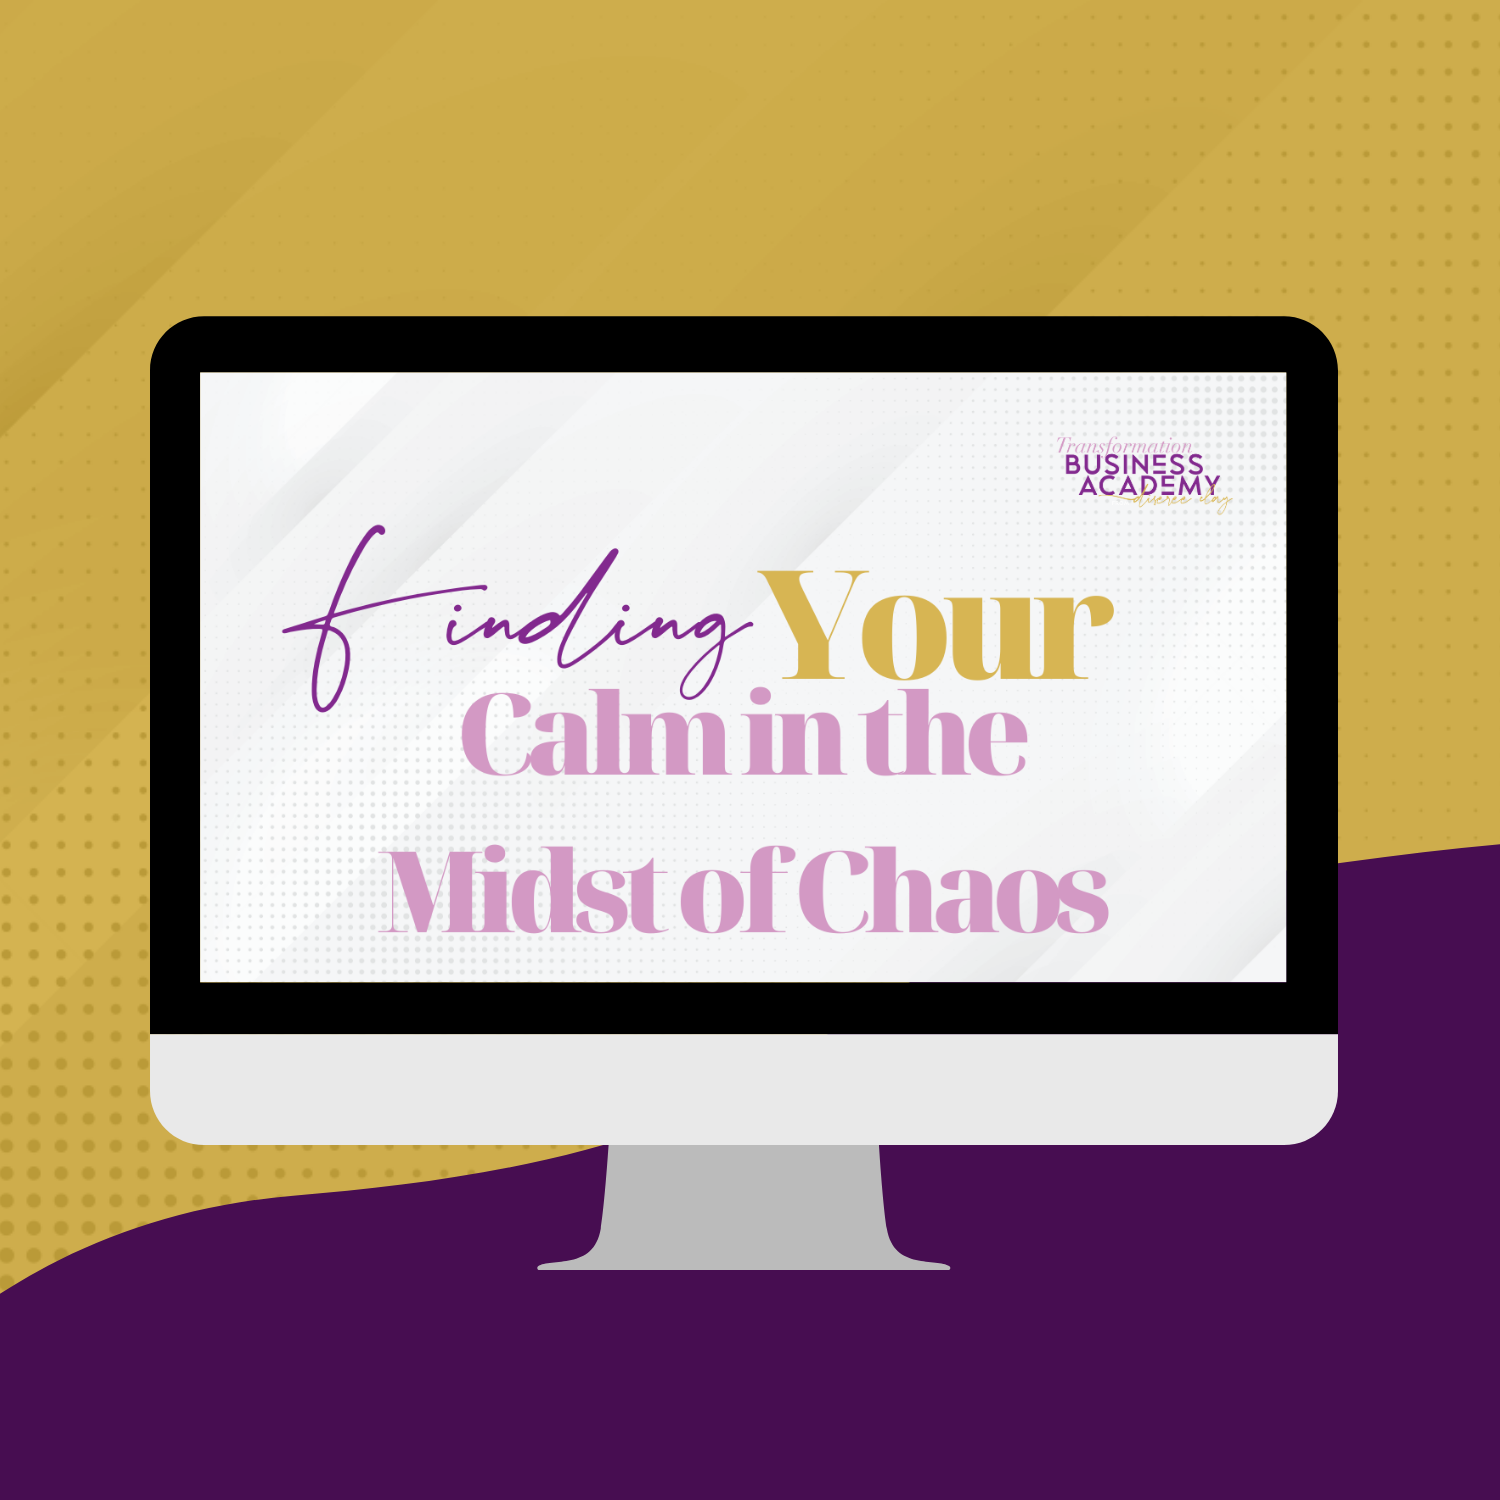 Finding Your Calm in the Midst of Chaos